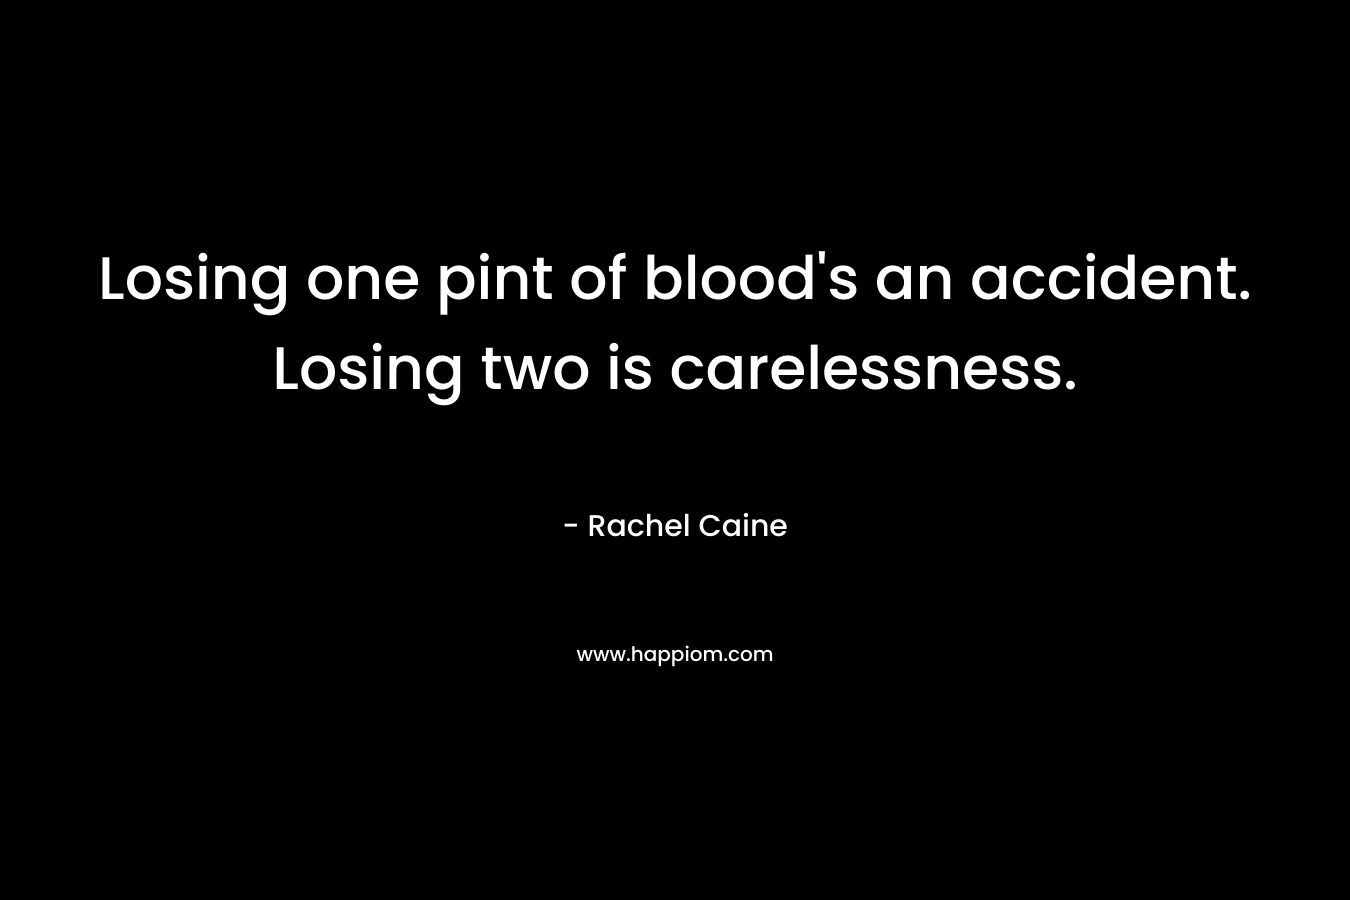 Losing one pint of blood's an accident. Losing two is carelessness.